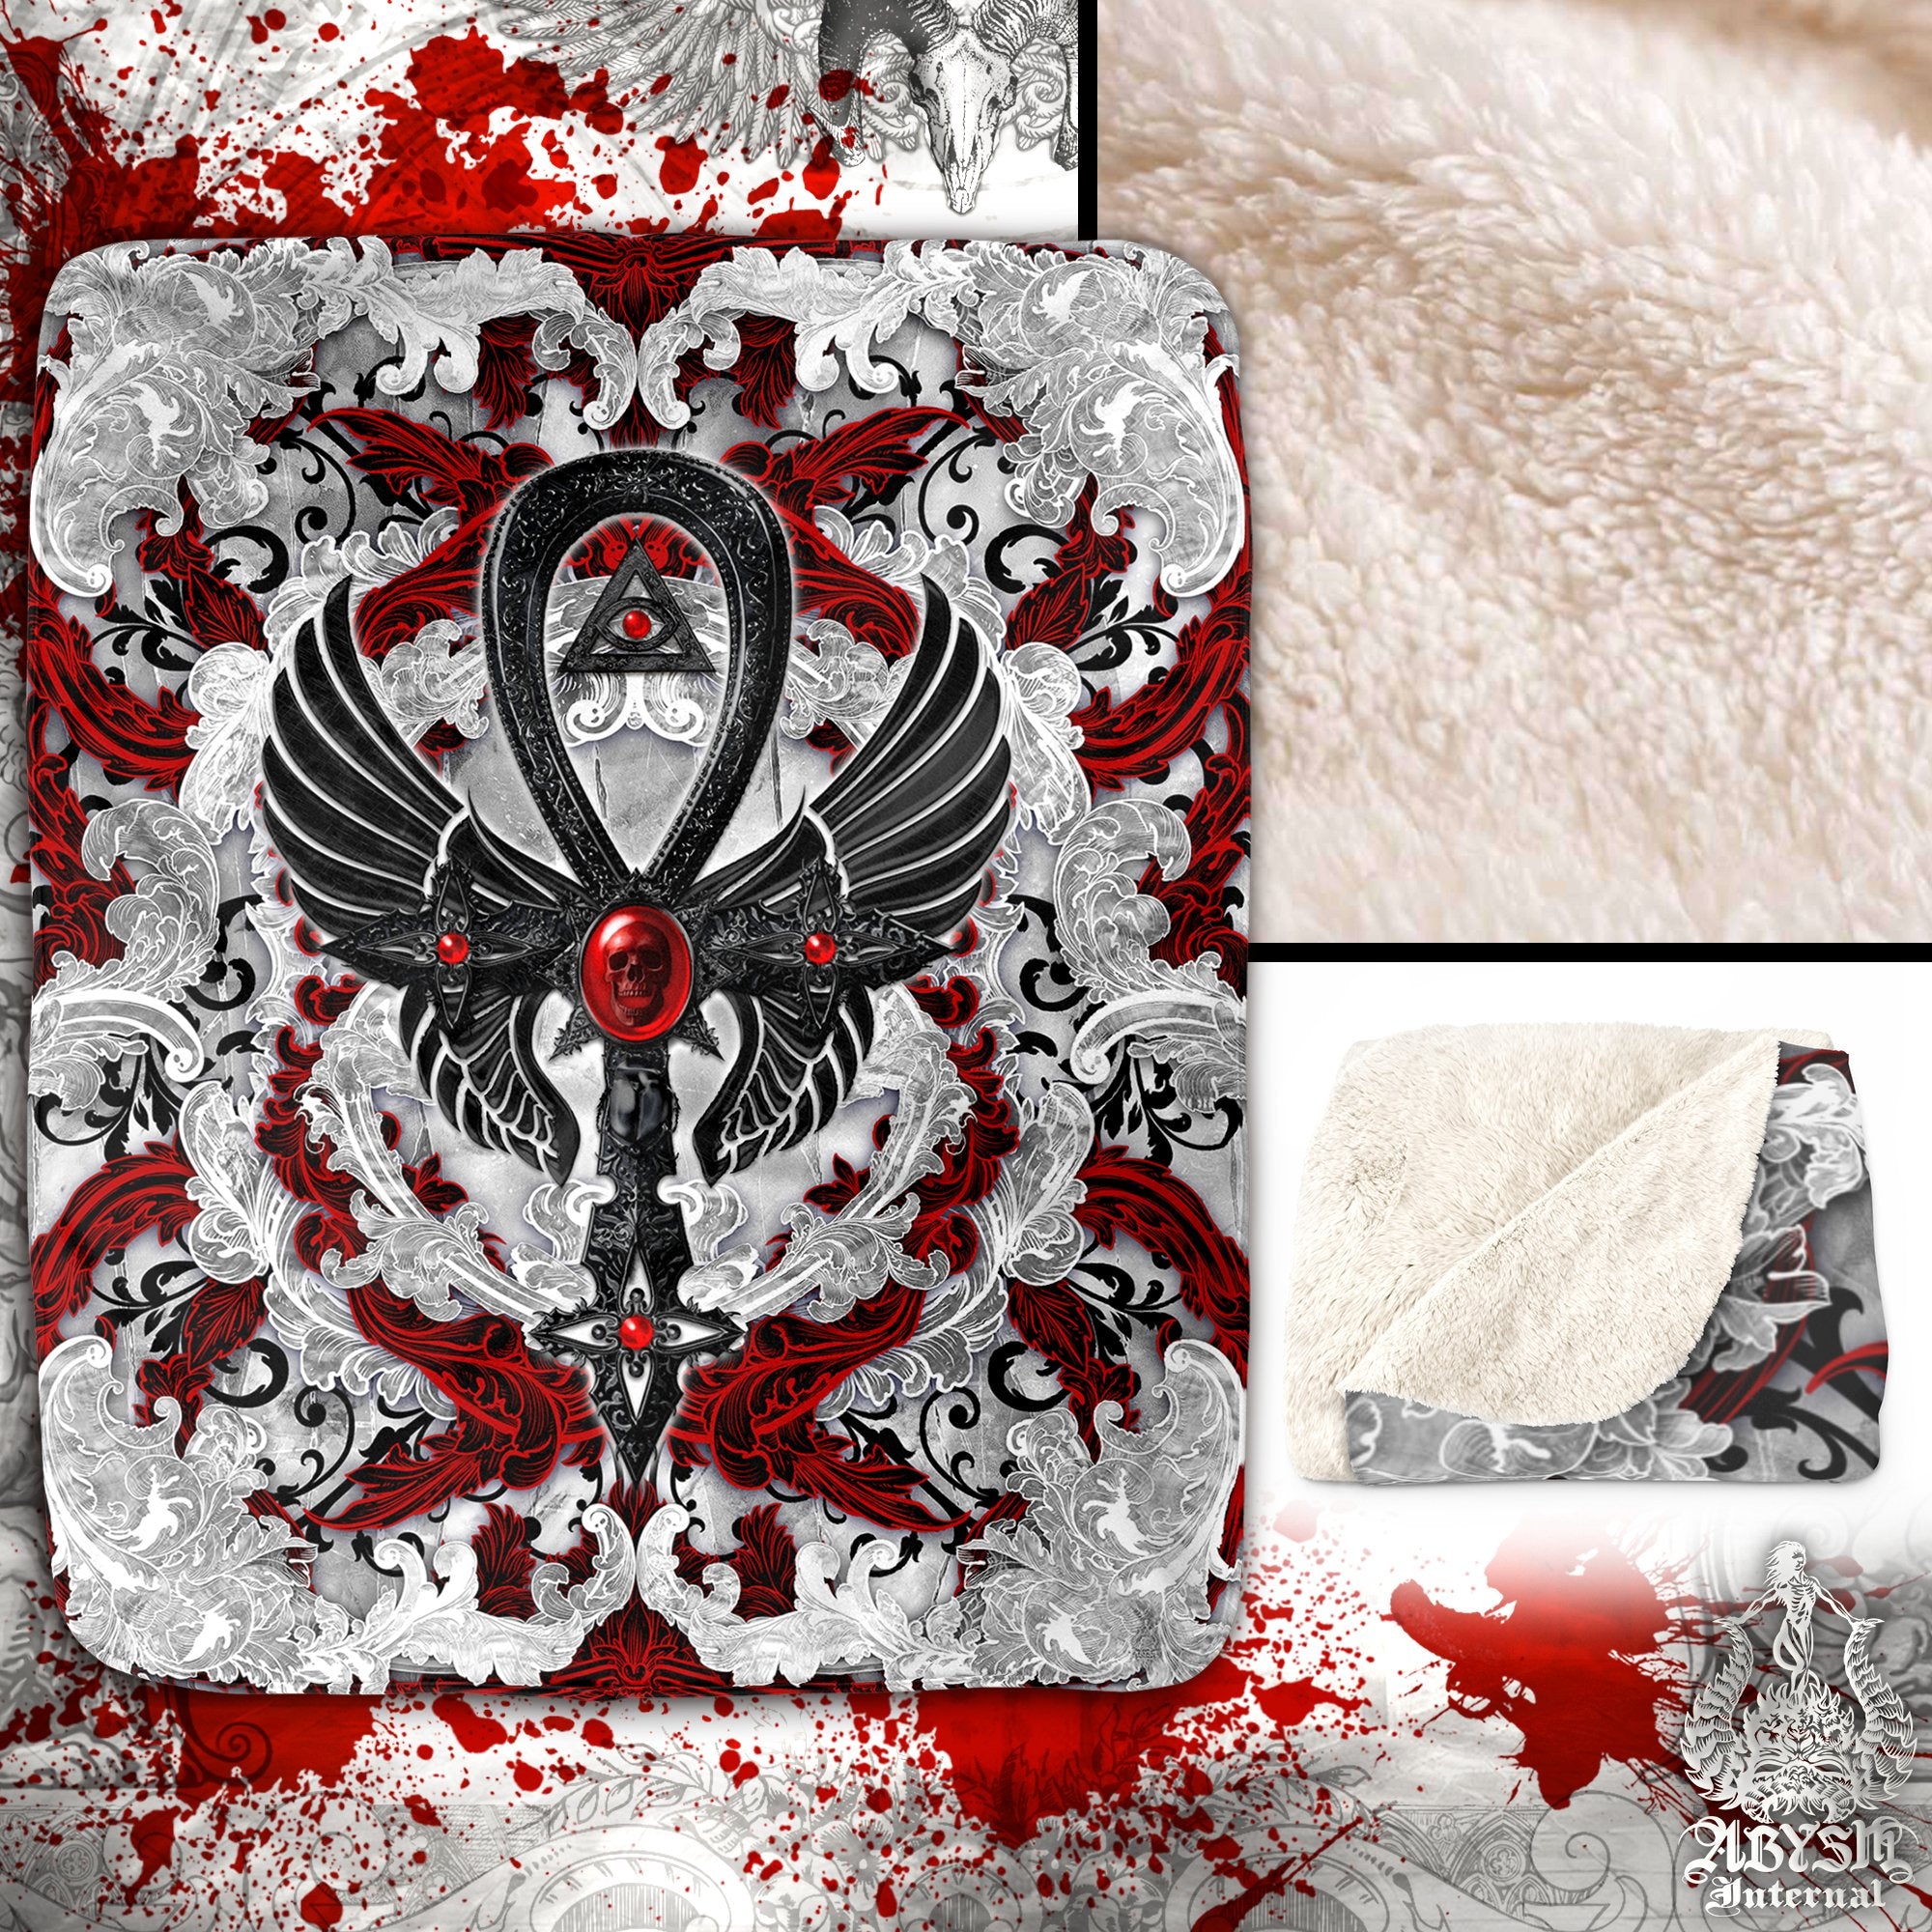 Bloody White Goth Sherpa Fleece Throw Blanket, Goth Ankh Cross Decor - Red, Black and White, 3 Colors - Abysm Internal